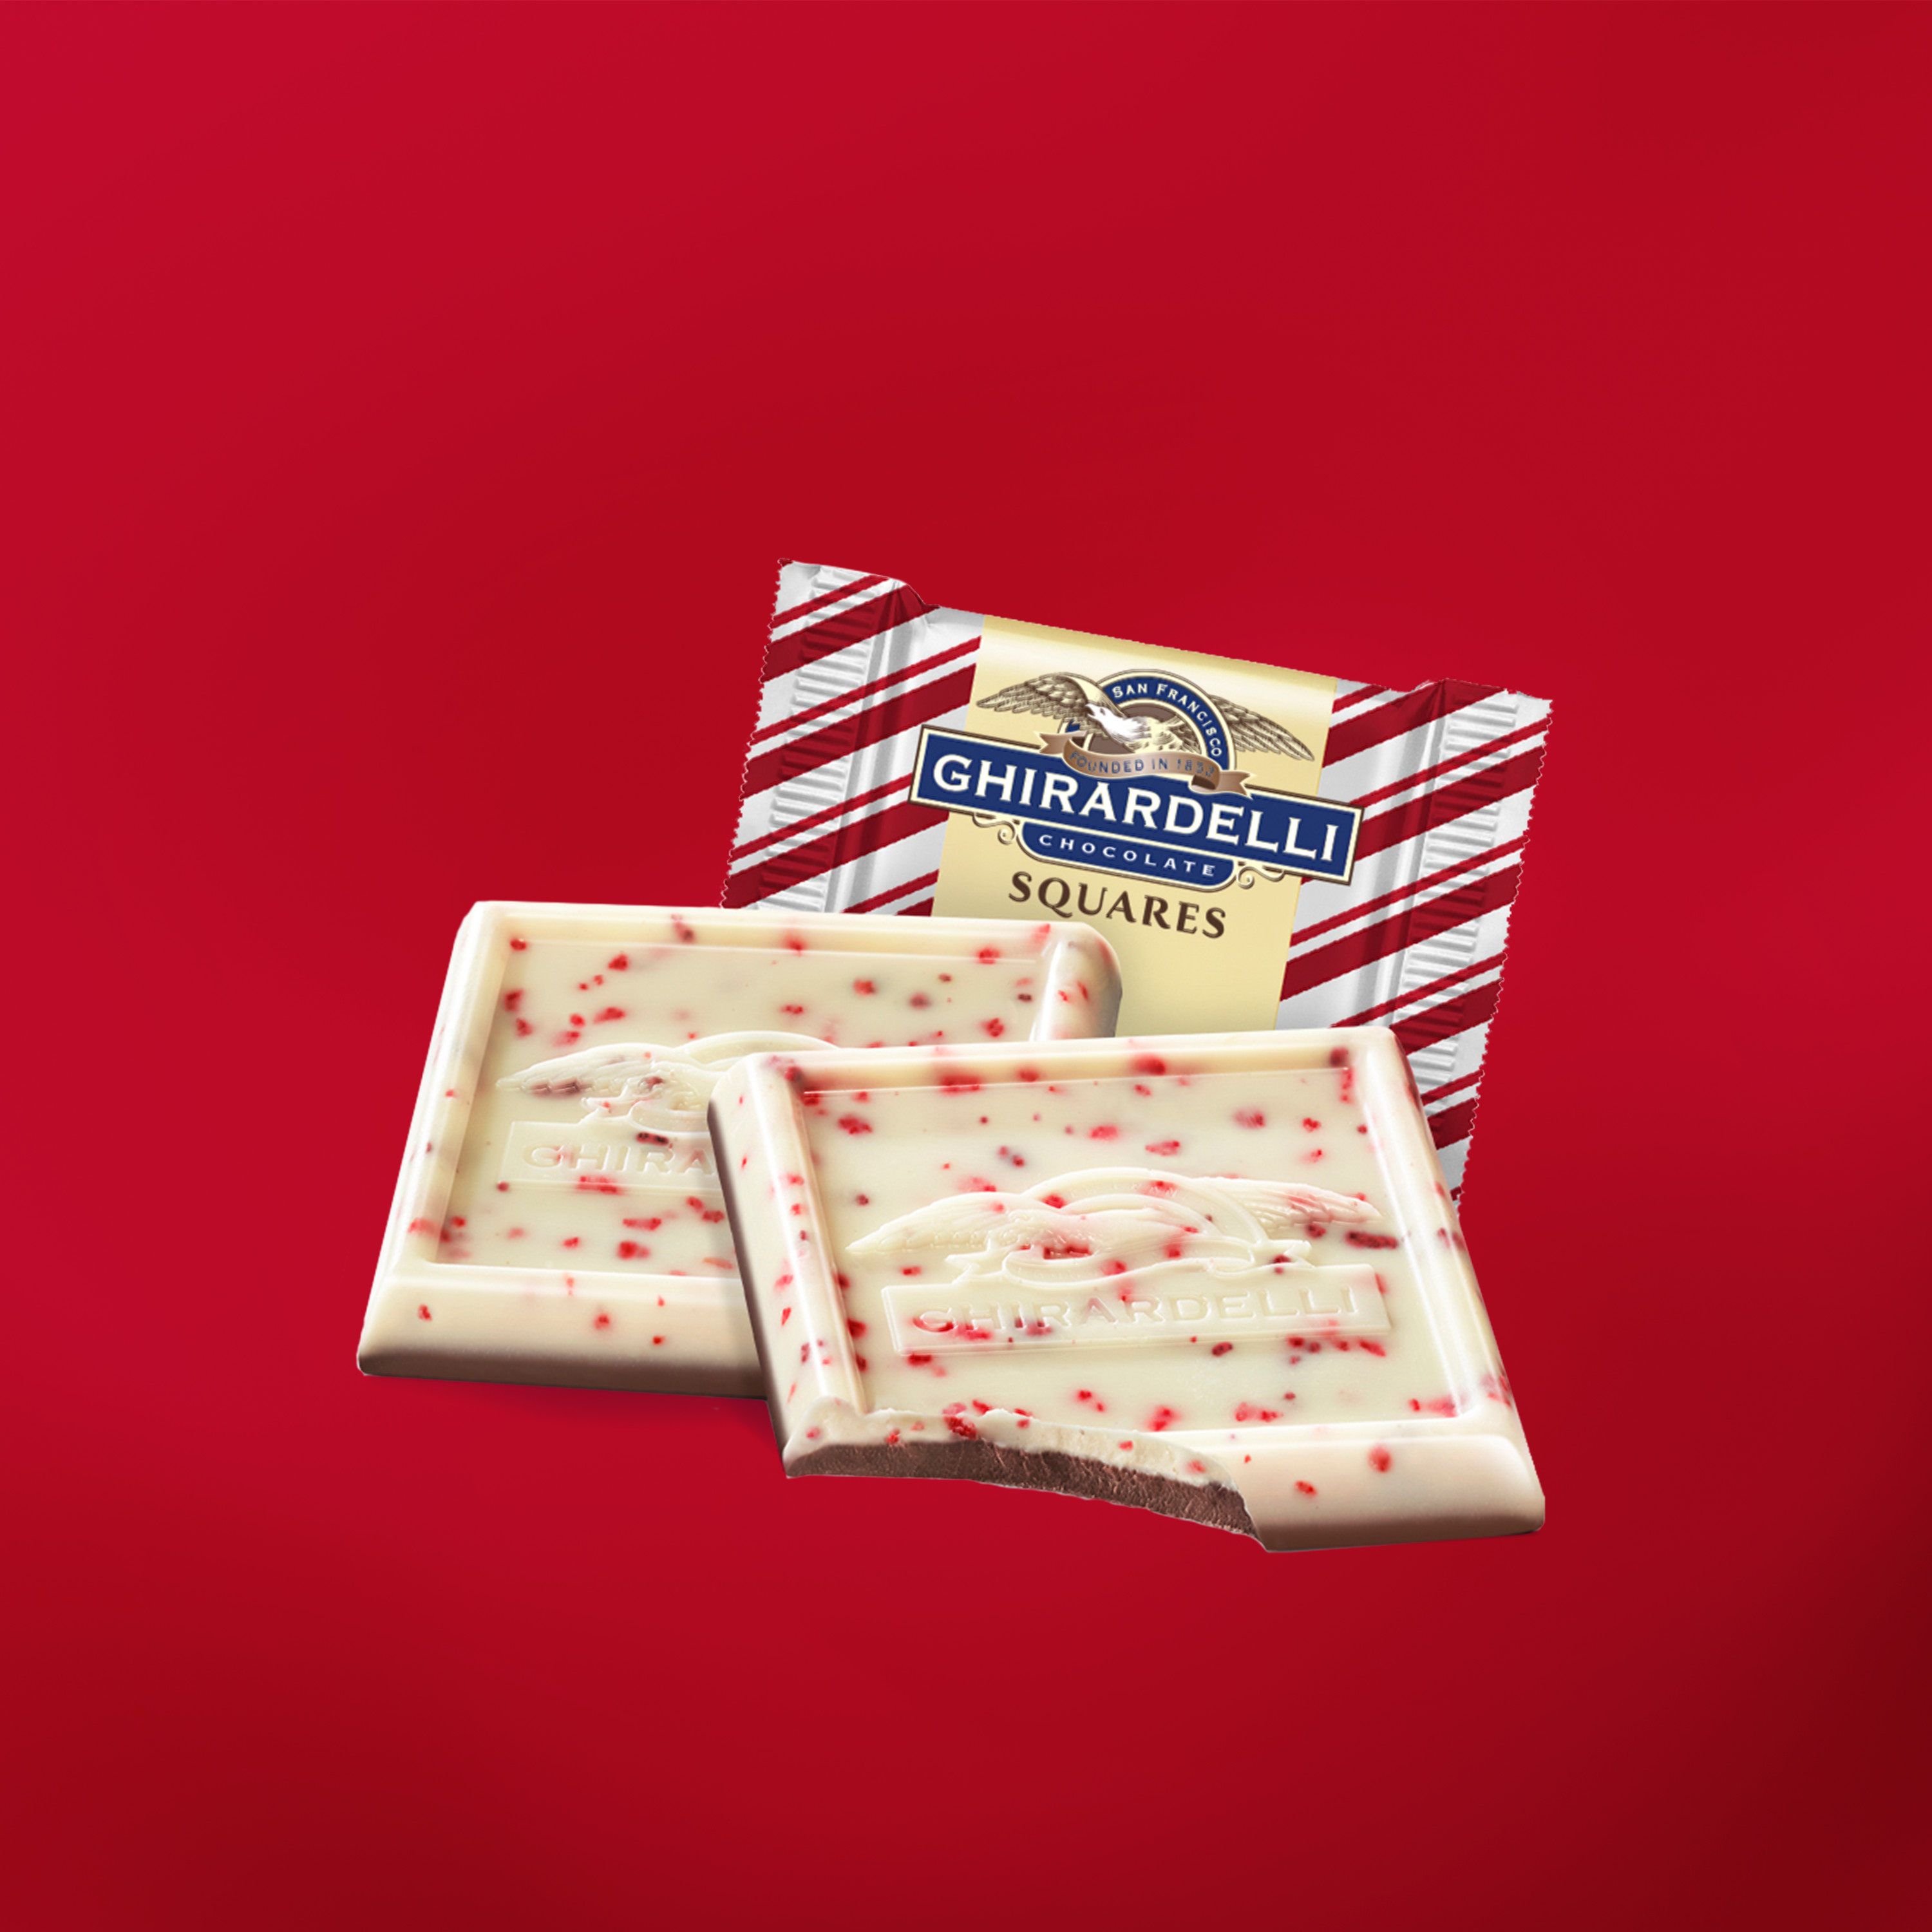 GHIRARDELLI Peppermint Bark Chocolate Squares, 7.9 oz Bag - image 3 of 10